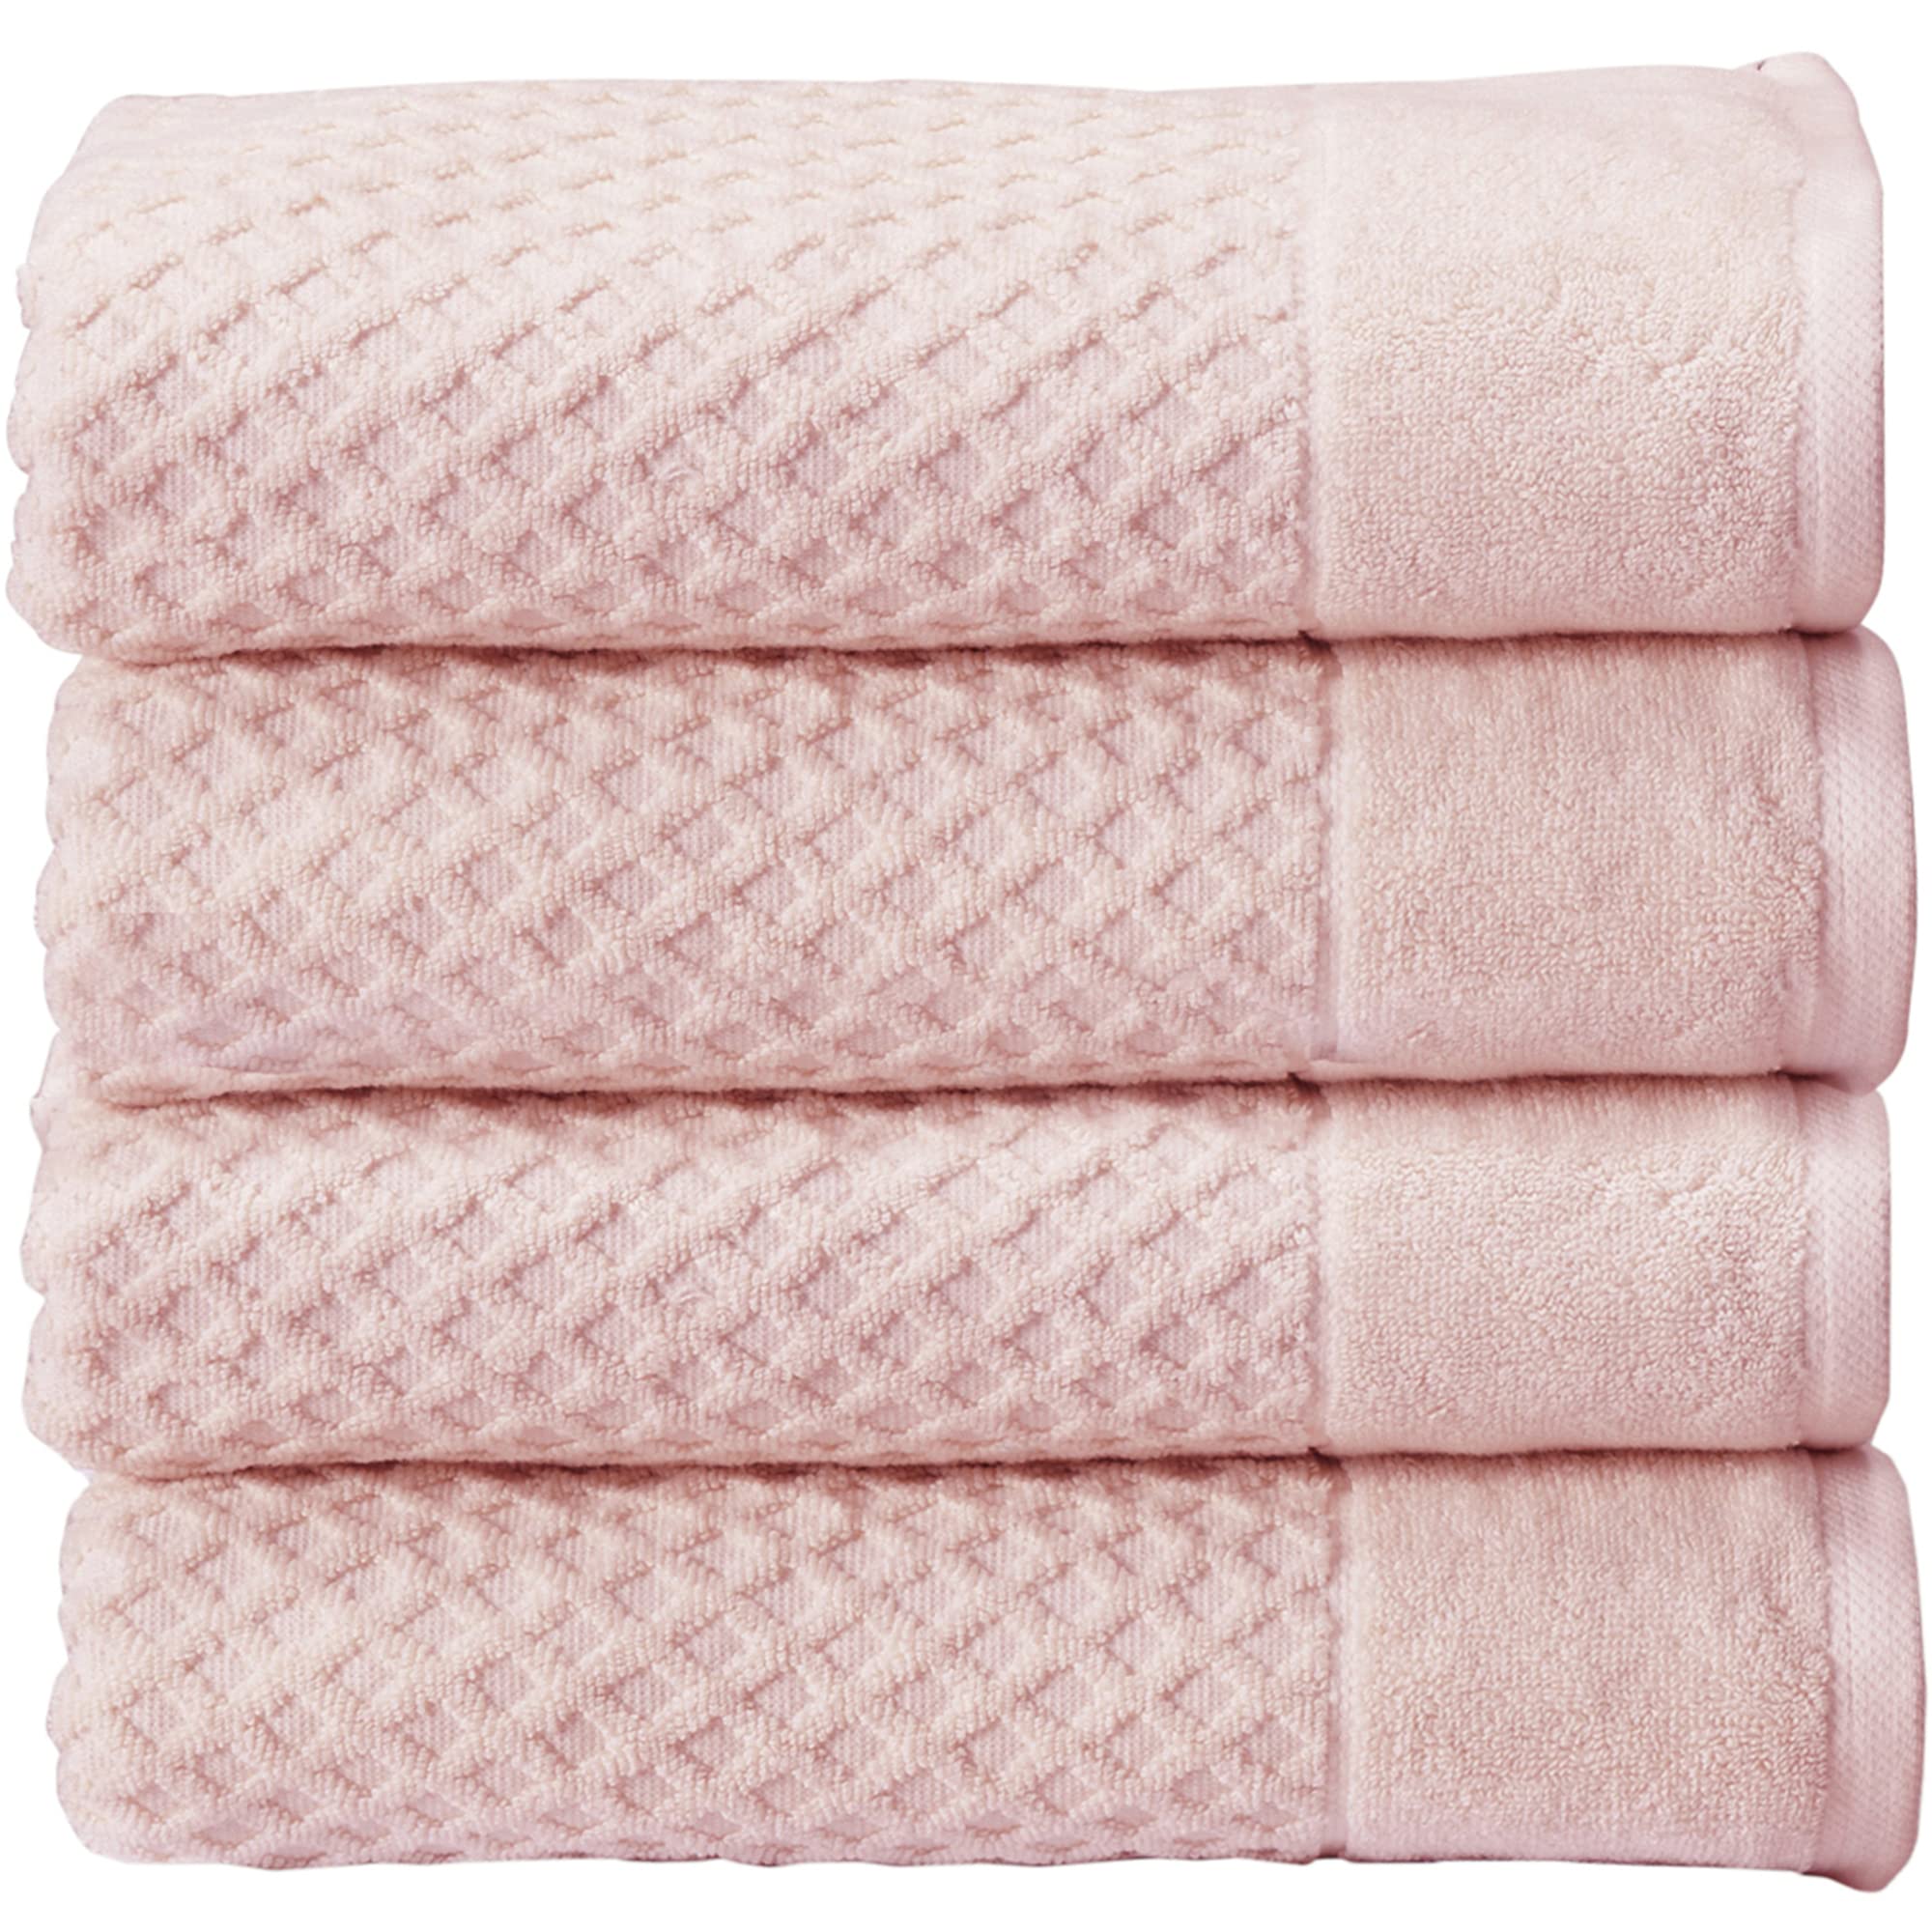 Great Bay Home 100 Cotton Pink Bath Towel Set 4 Soft Bath Towels (30 X 52 Inches) Highly Absorbent, Quick Dry Bath Towels Grayso